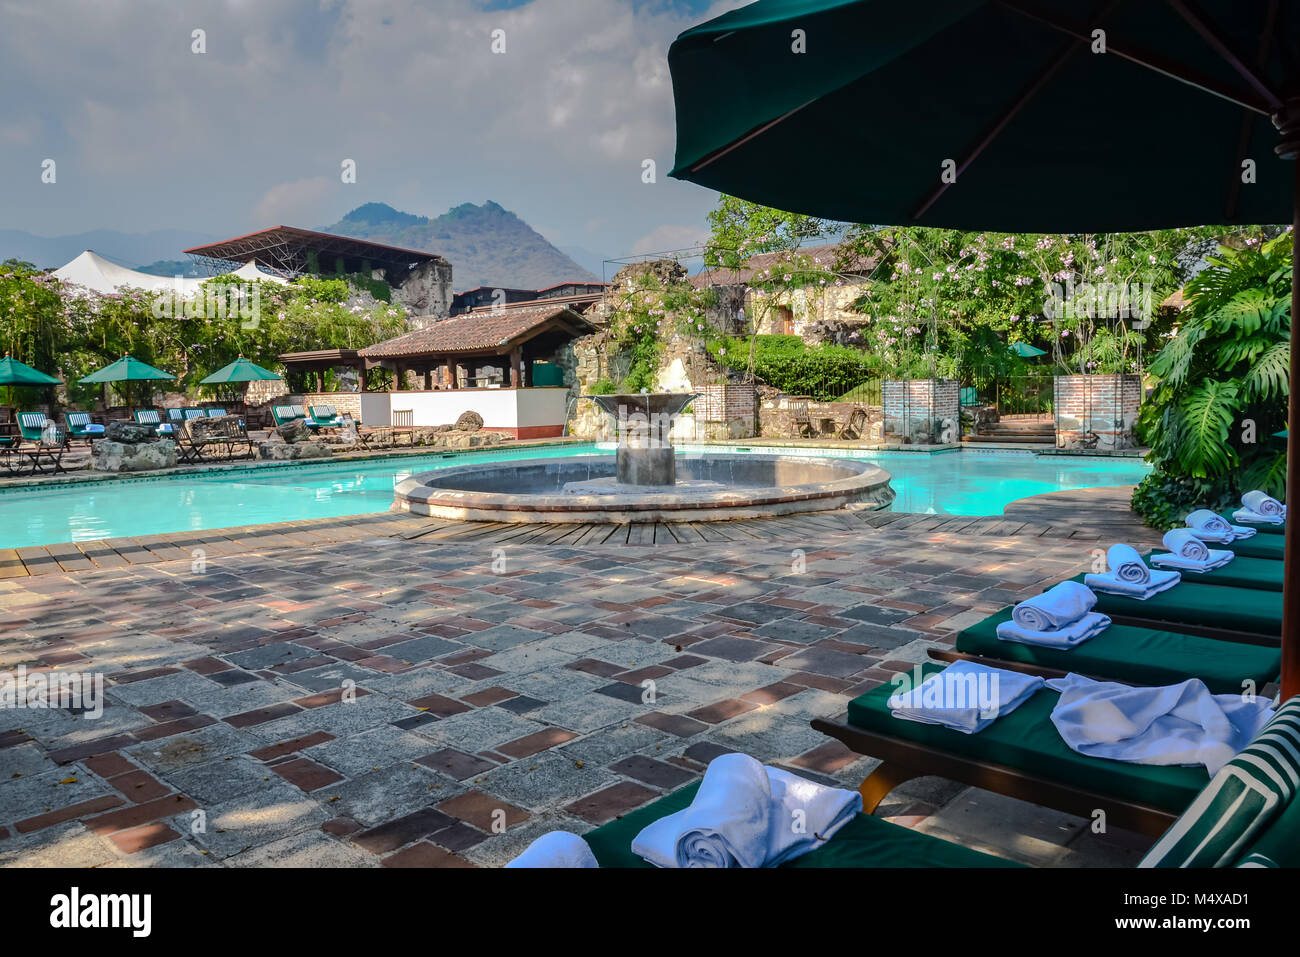 Antigua, Guatemala. Old world elegance at a resort pool with a central fountain and a row of green lounge chairs. Stock Photo